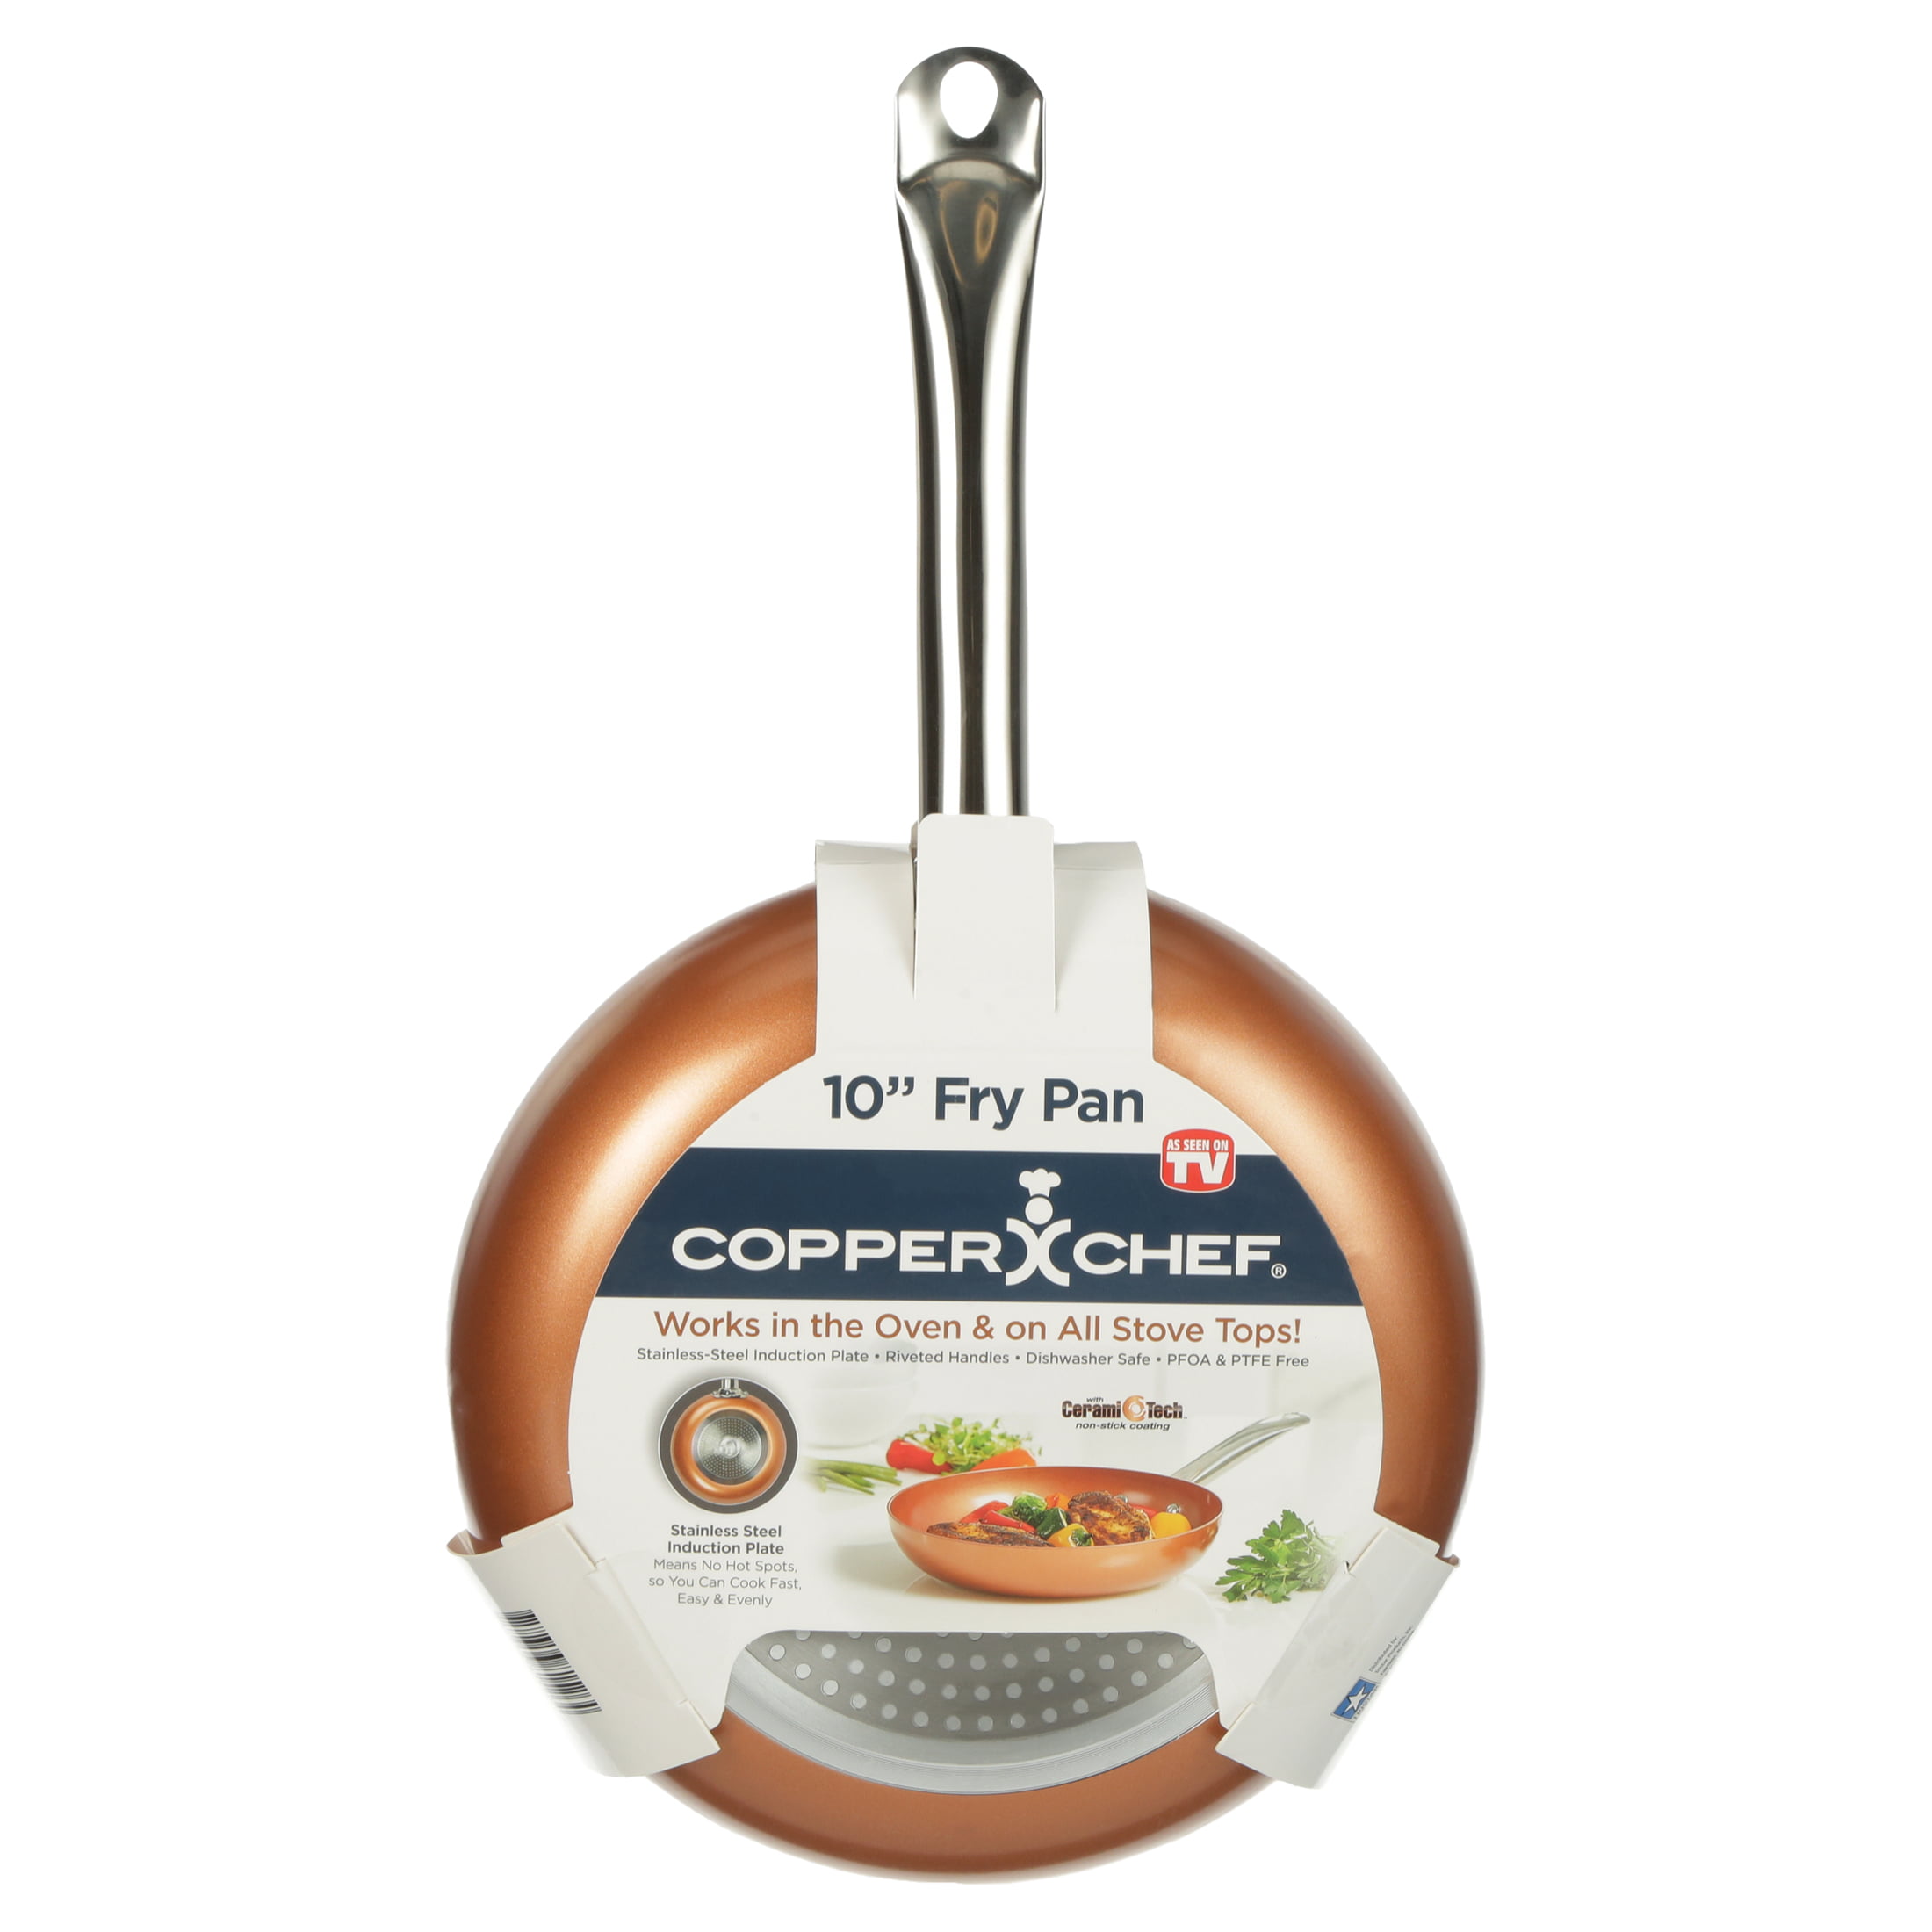 Tiger Chef Small Copper Pot Set- 5.5 inch Egg Pan, 28 Ounce Sauce Pan (.875  Quart), 10 Ounce Saucepan (.31 Quart)- Copper Plated Mini Stainless Steel